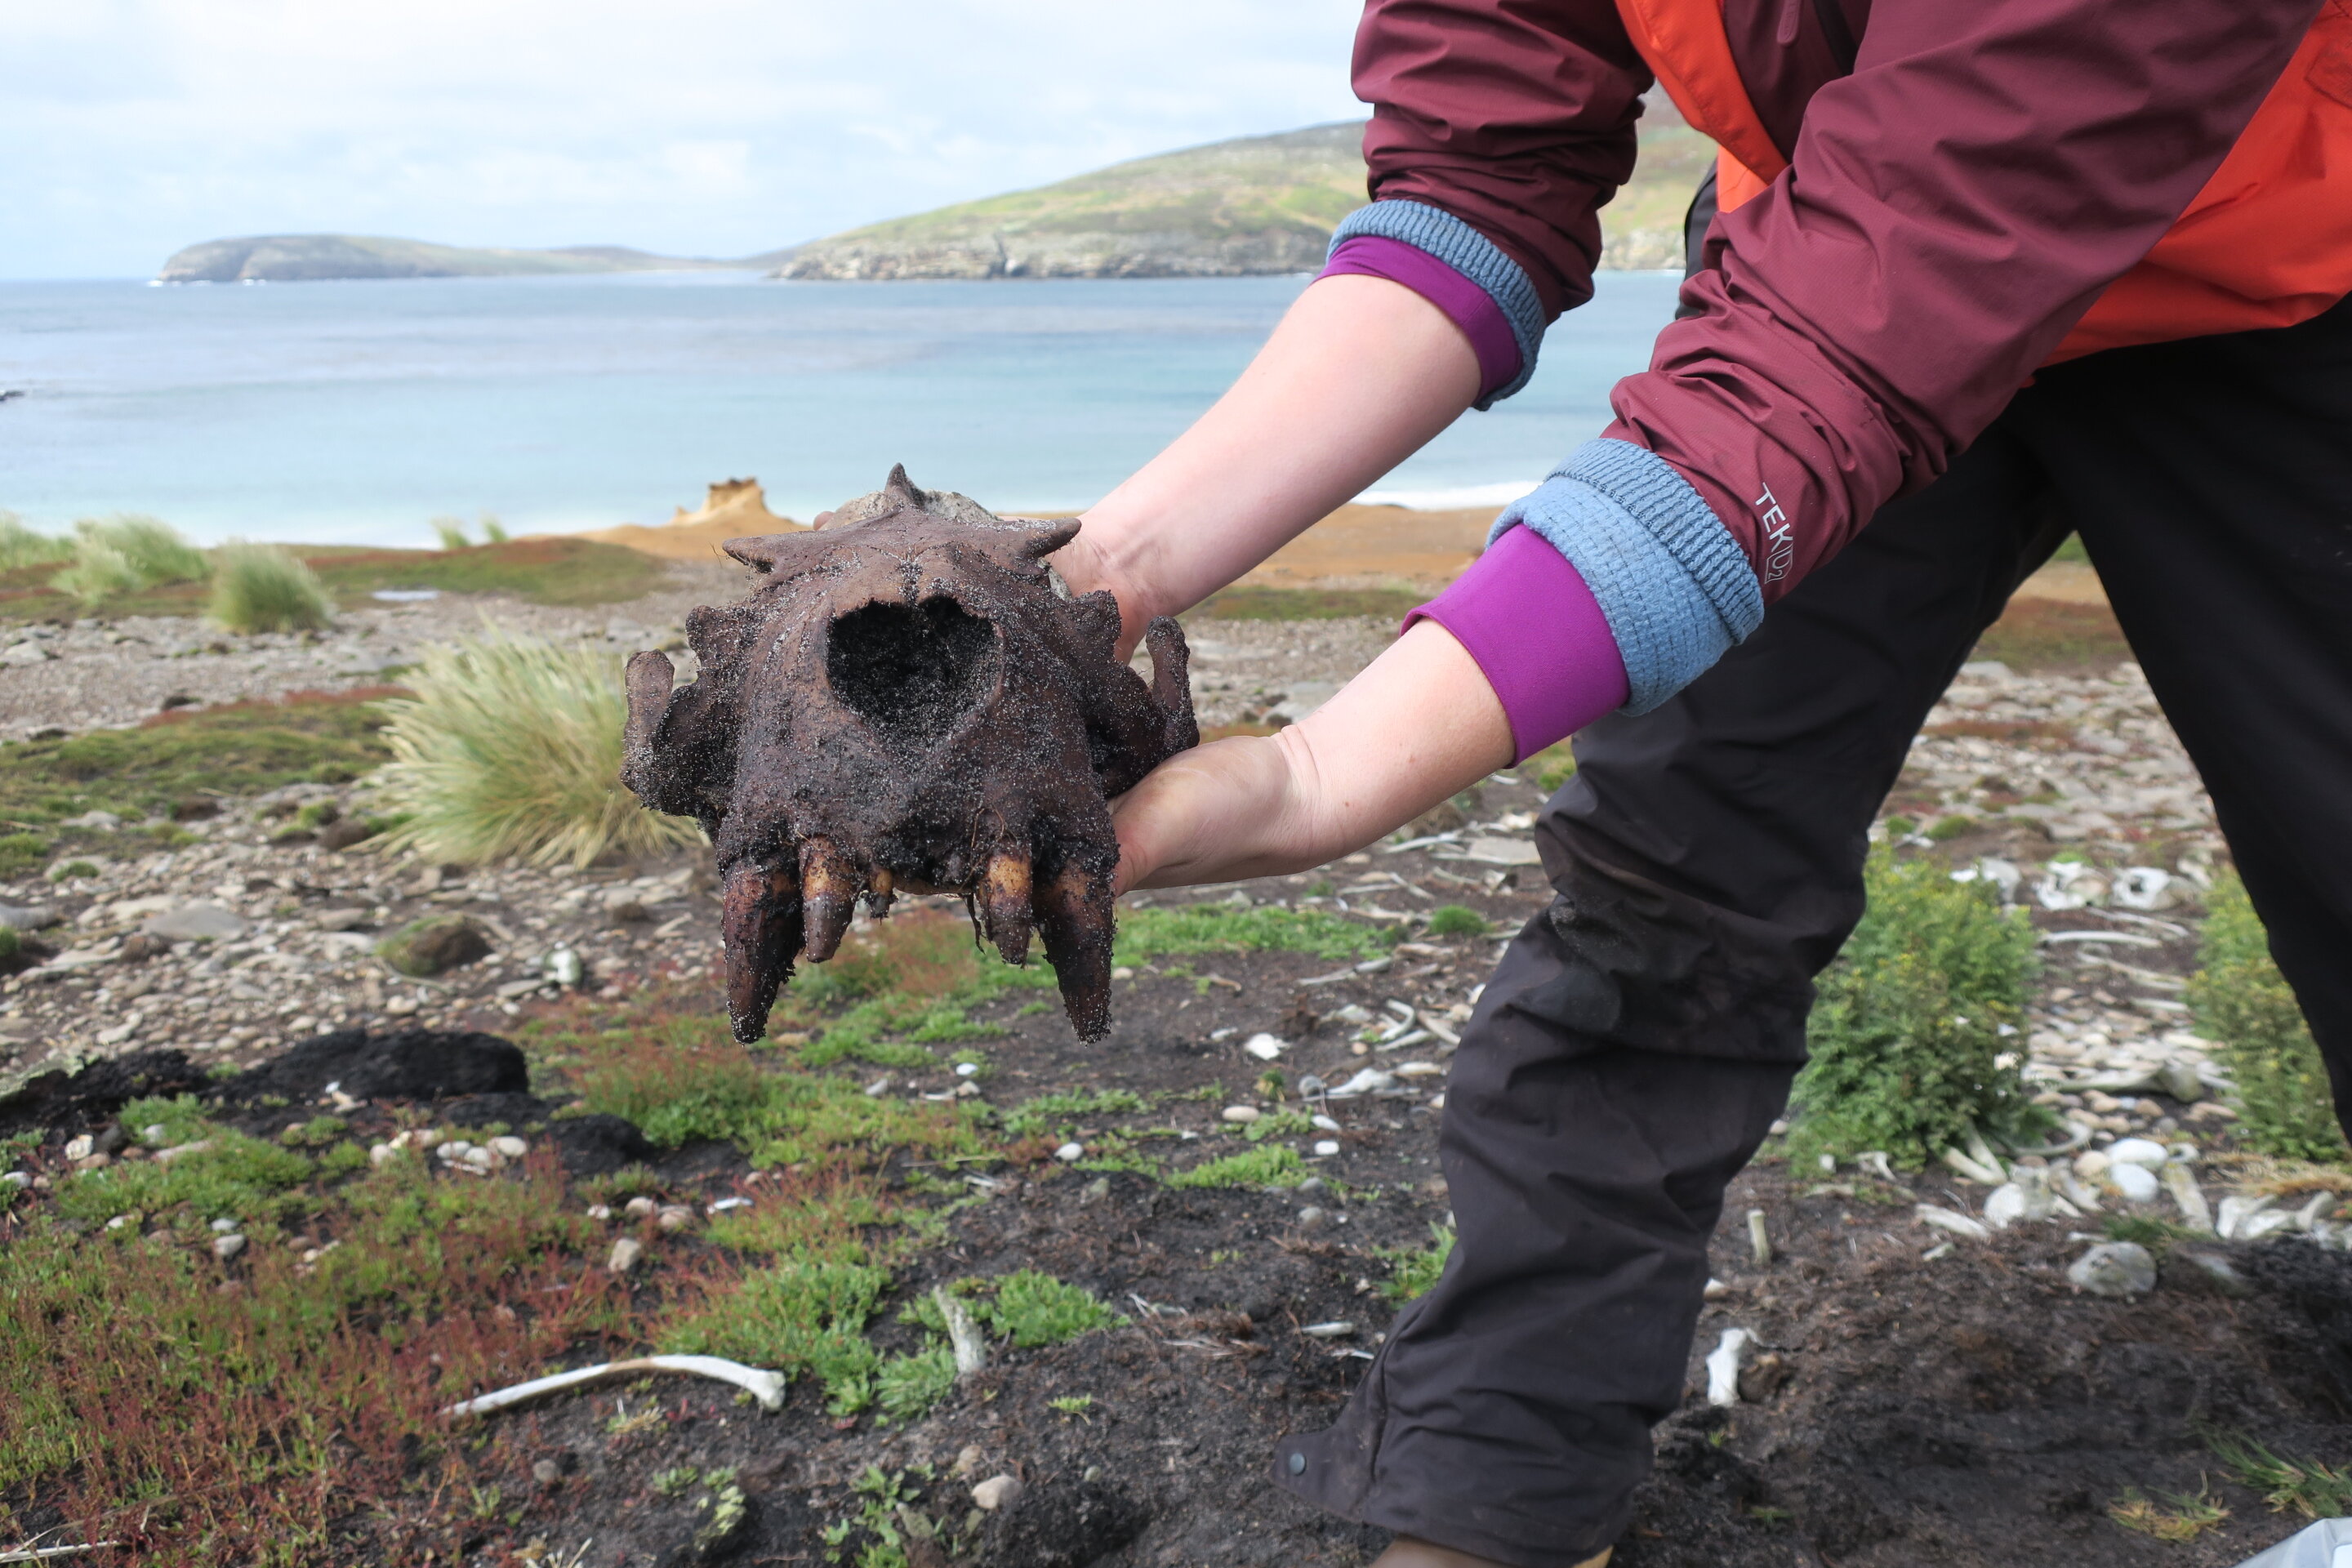 Team discovers evidence of prehistoric human activity in Falkland Islands